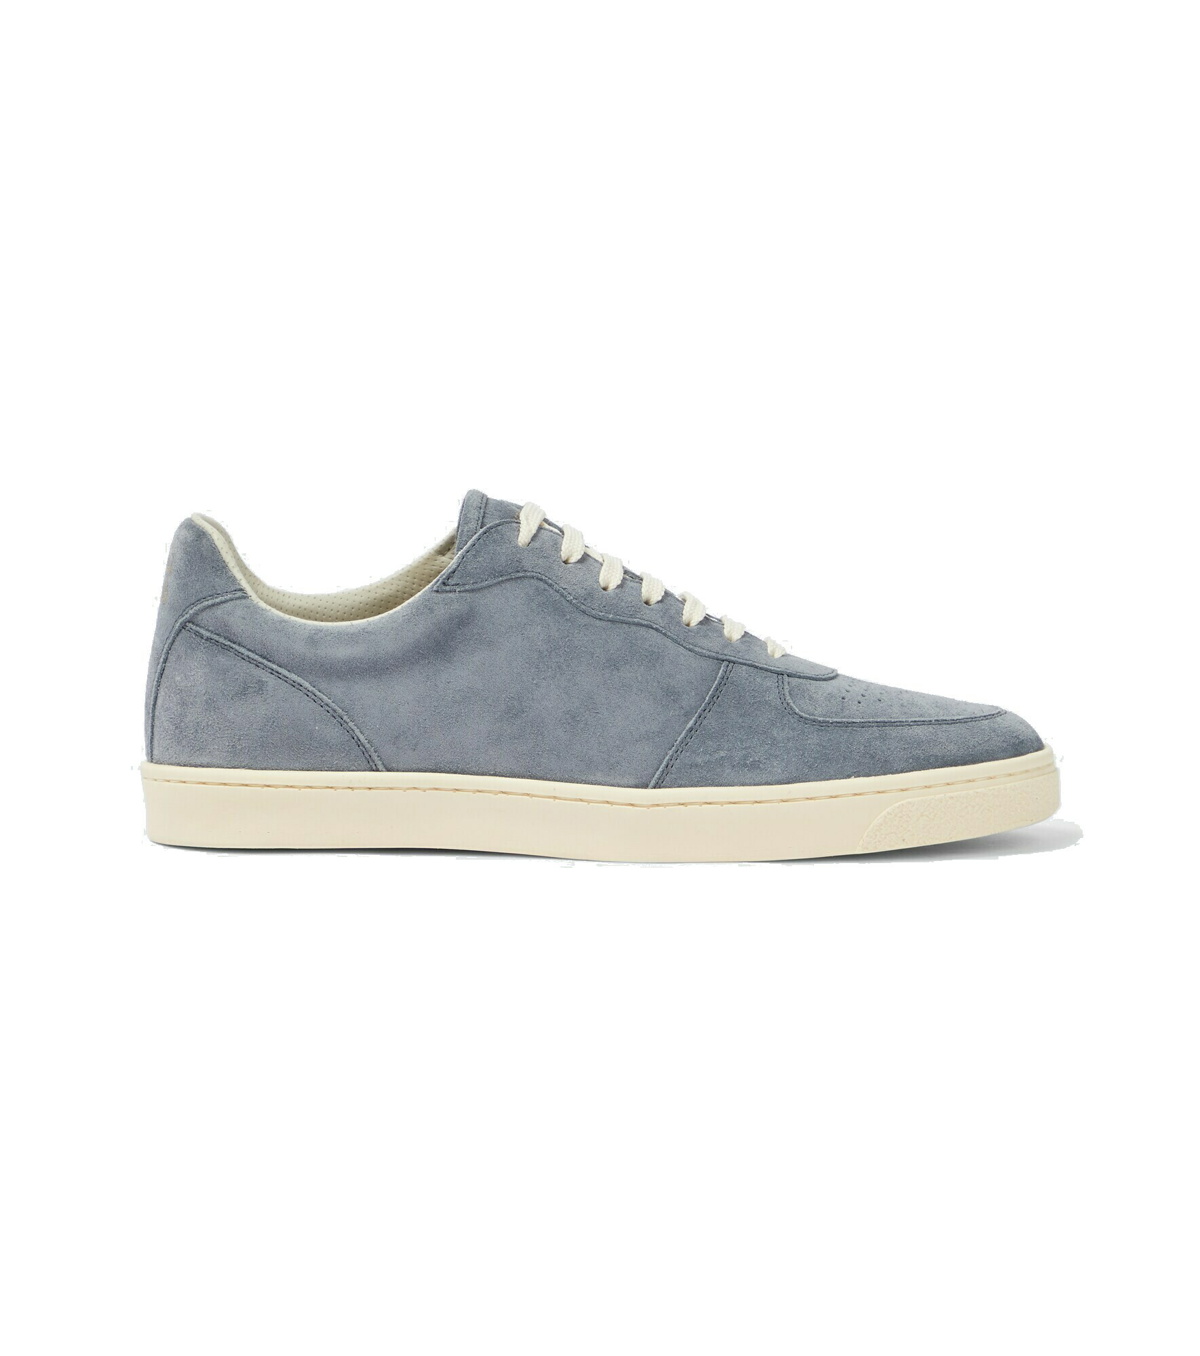 Brunello Cucinelli - Washed suede low-top sneakers Brunello Cucinelli